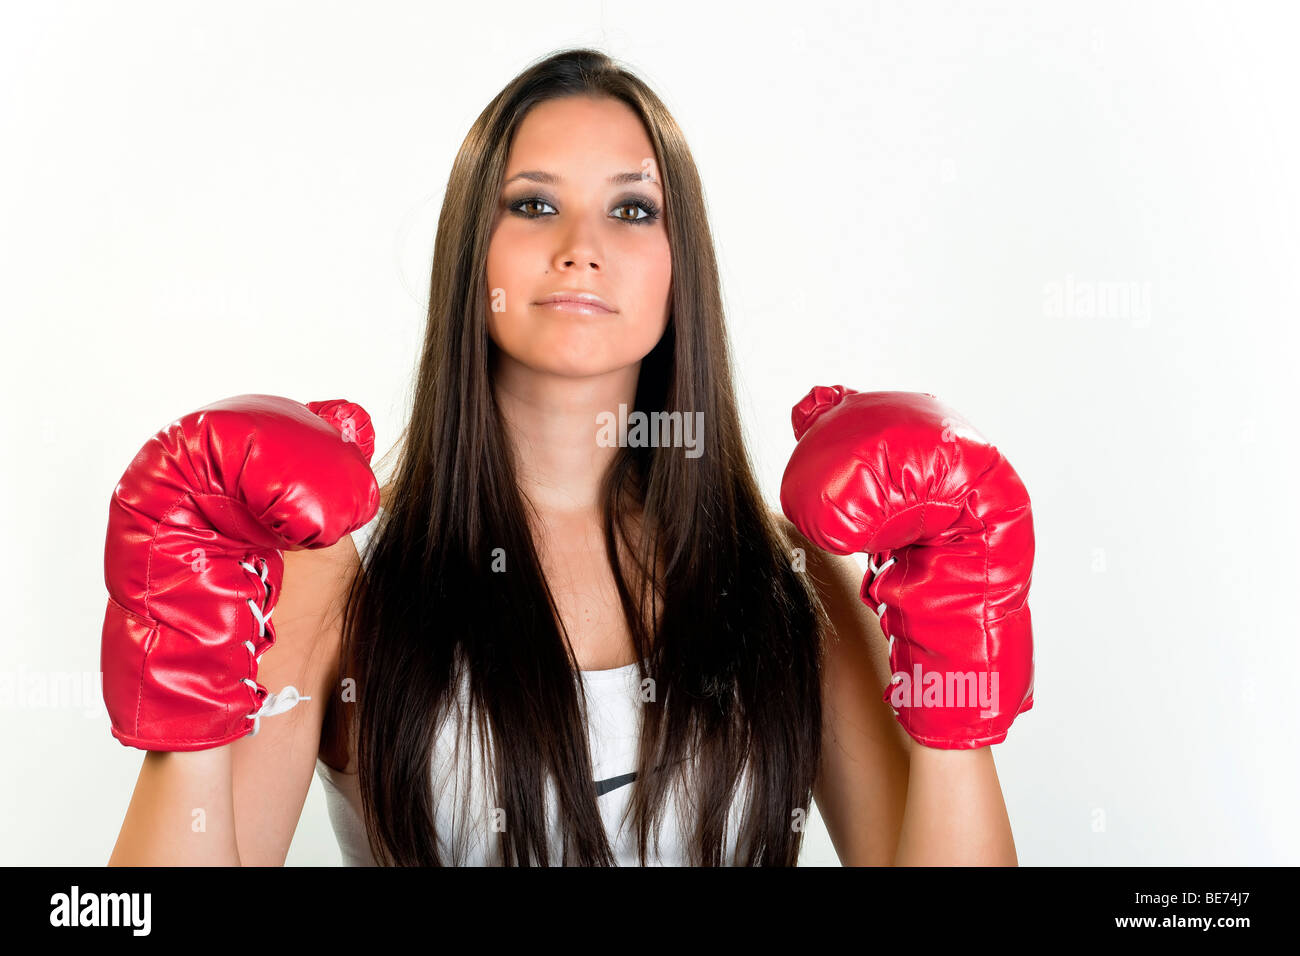 Young woman, 20, wearing boxing gloves and looking proud Stock Photo